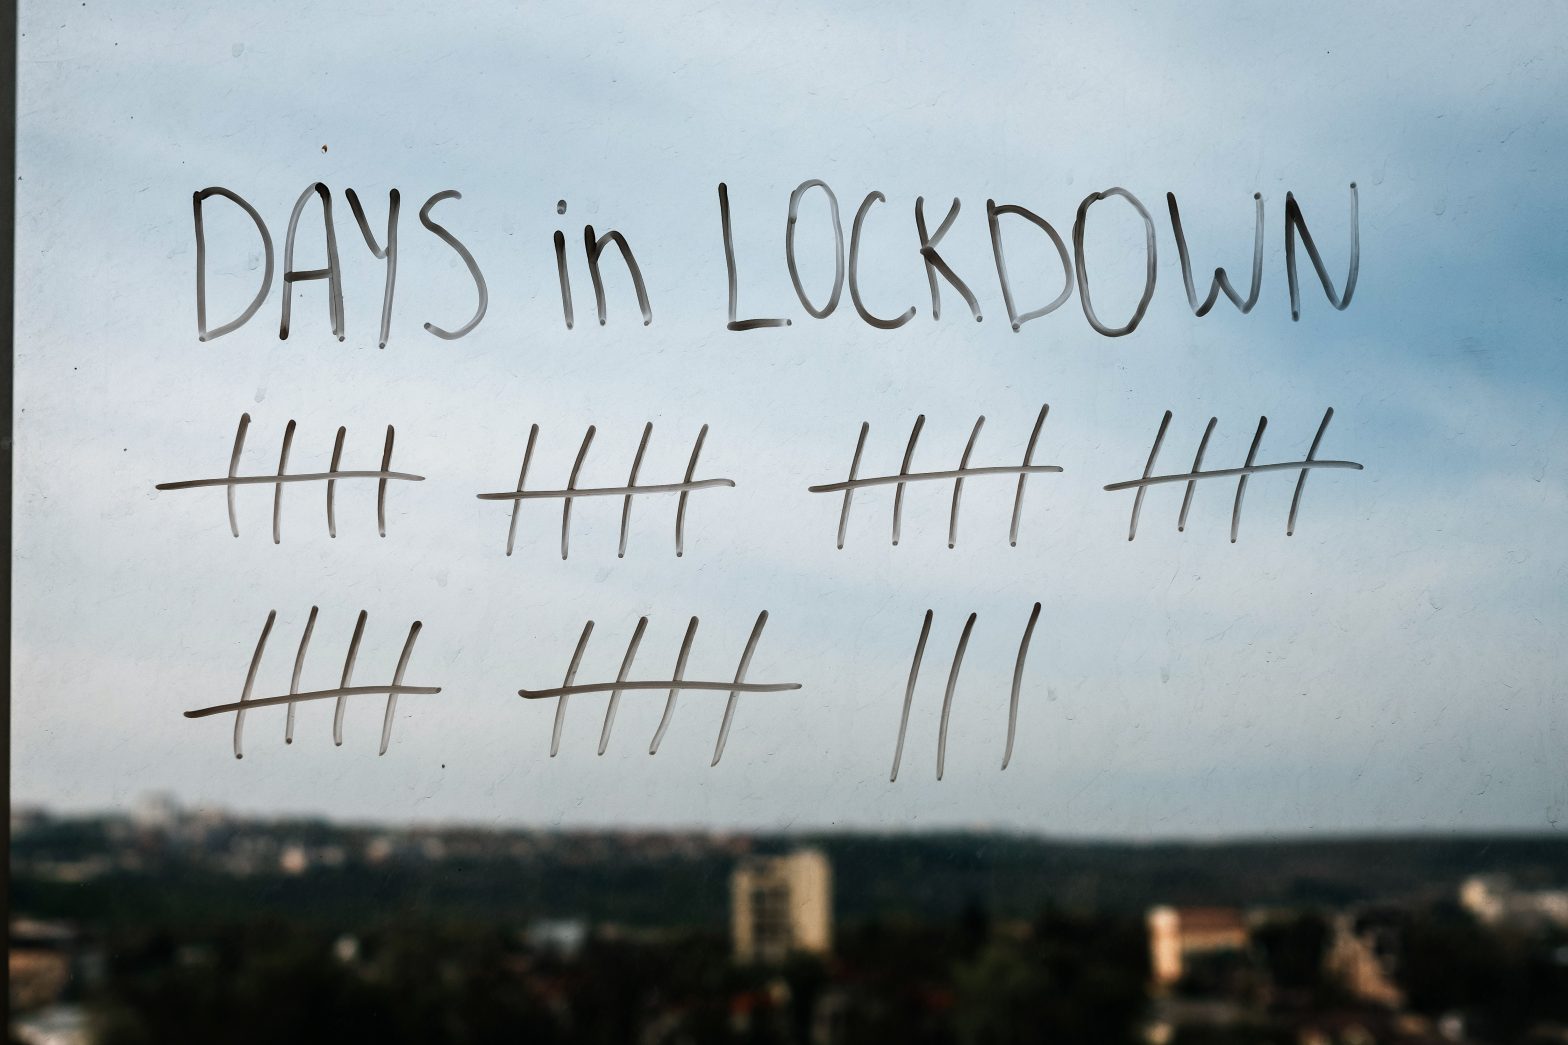 Counting days in lock down in prison. Wisconsin prisons